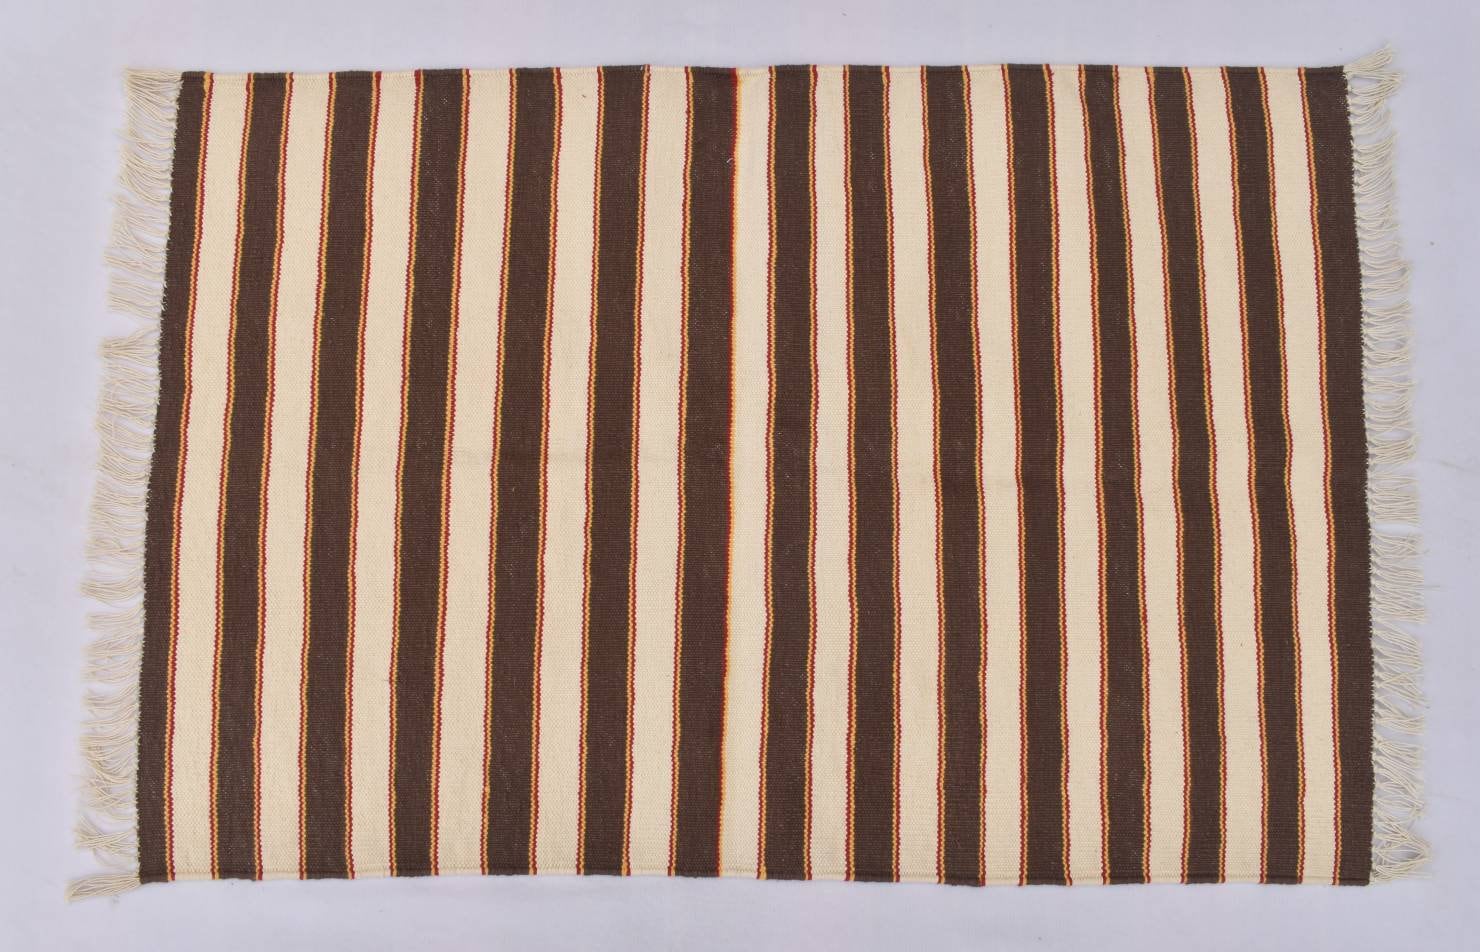 2x3 Small Size Brown Cotton Rug Dark Red Border Hand Woven 